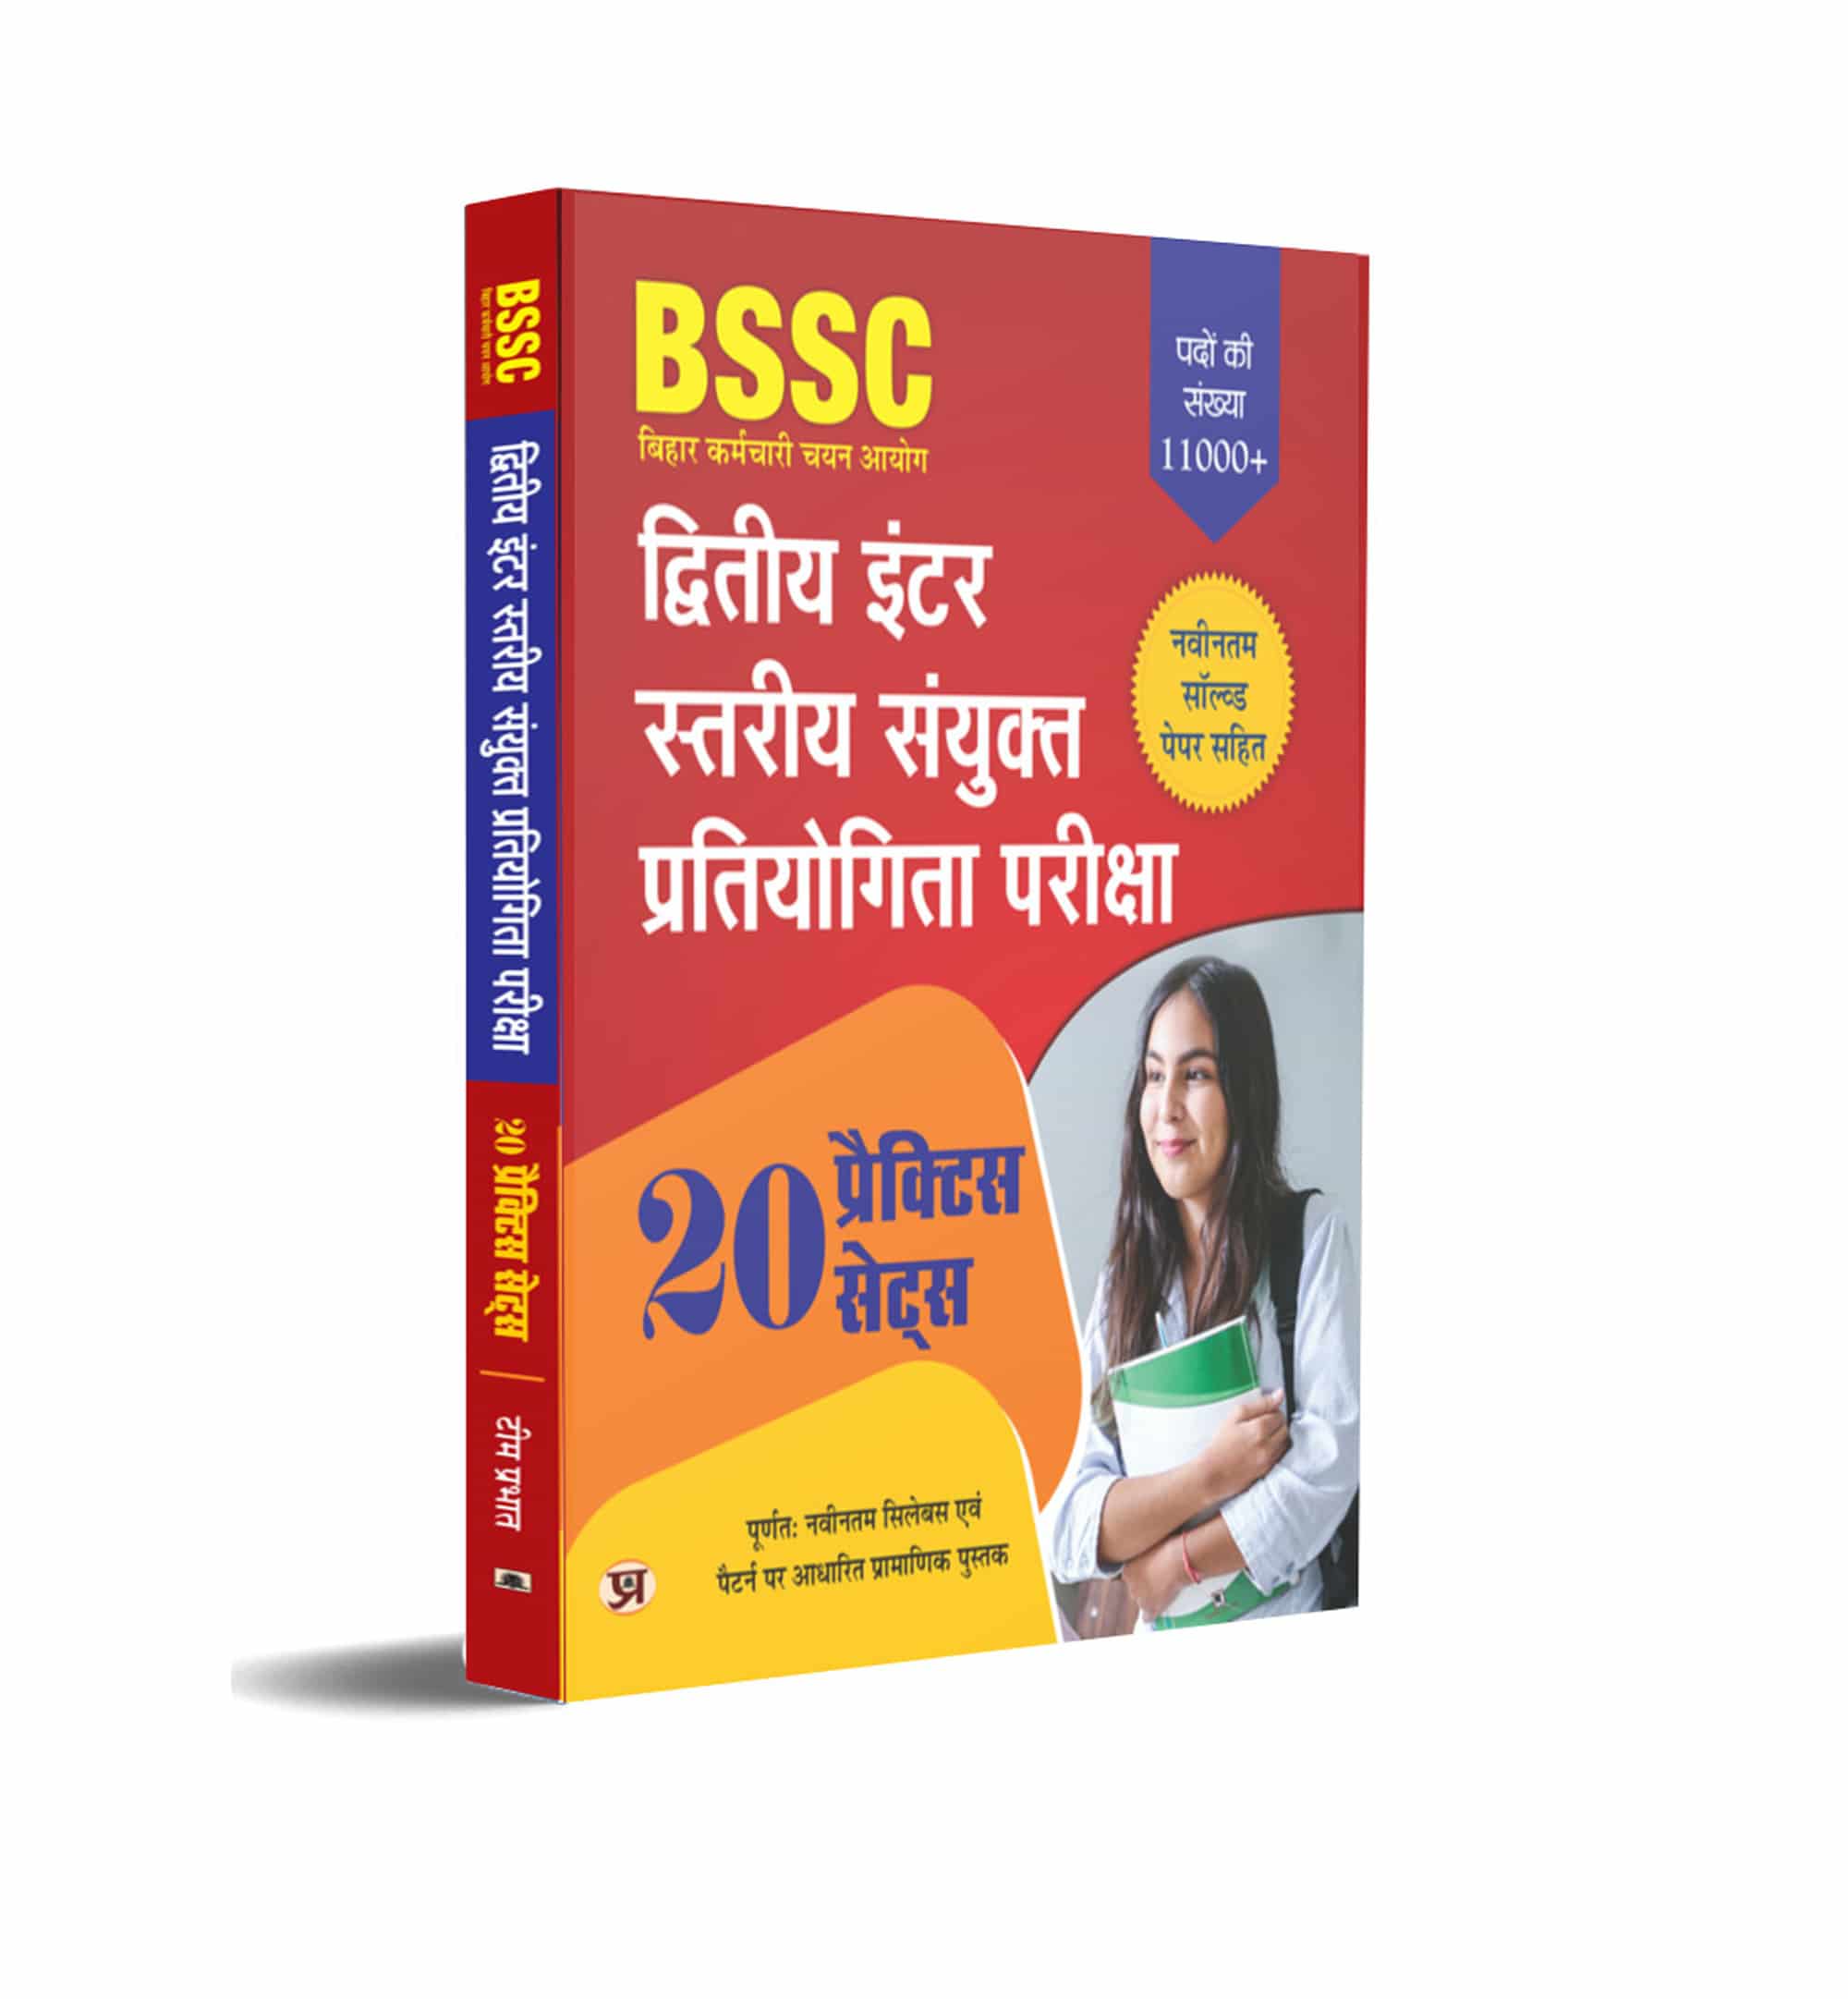 BSSC Bihar Secondary Intermediate Combined Competitive Examination